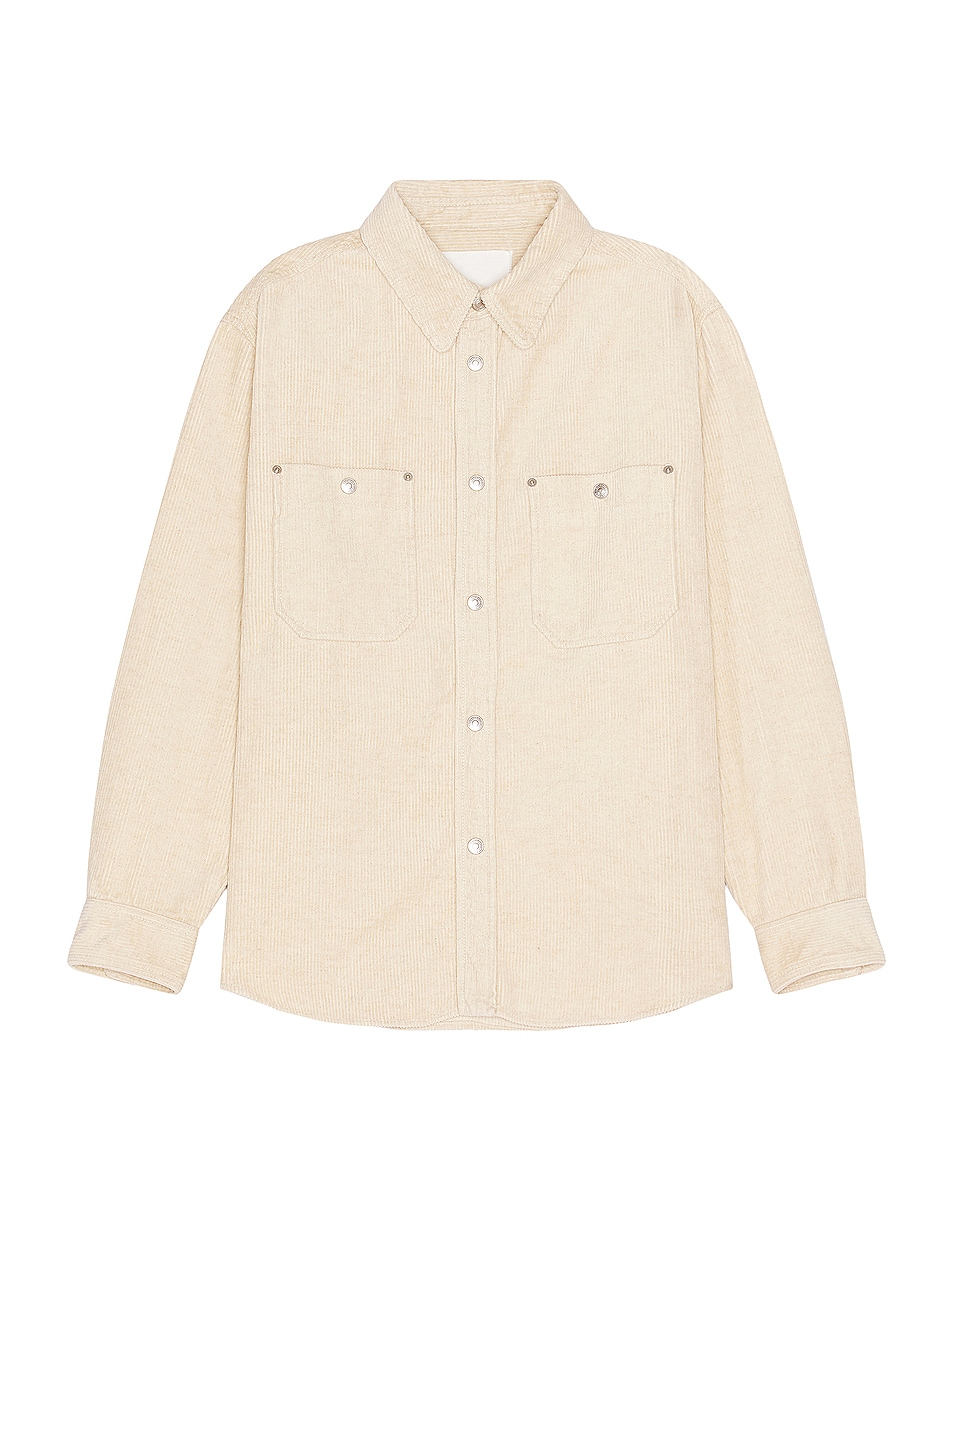 Image 1 of Isabel Marant Ritchie Shirt in Beige